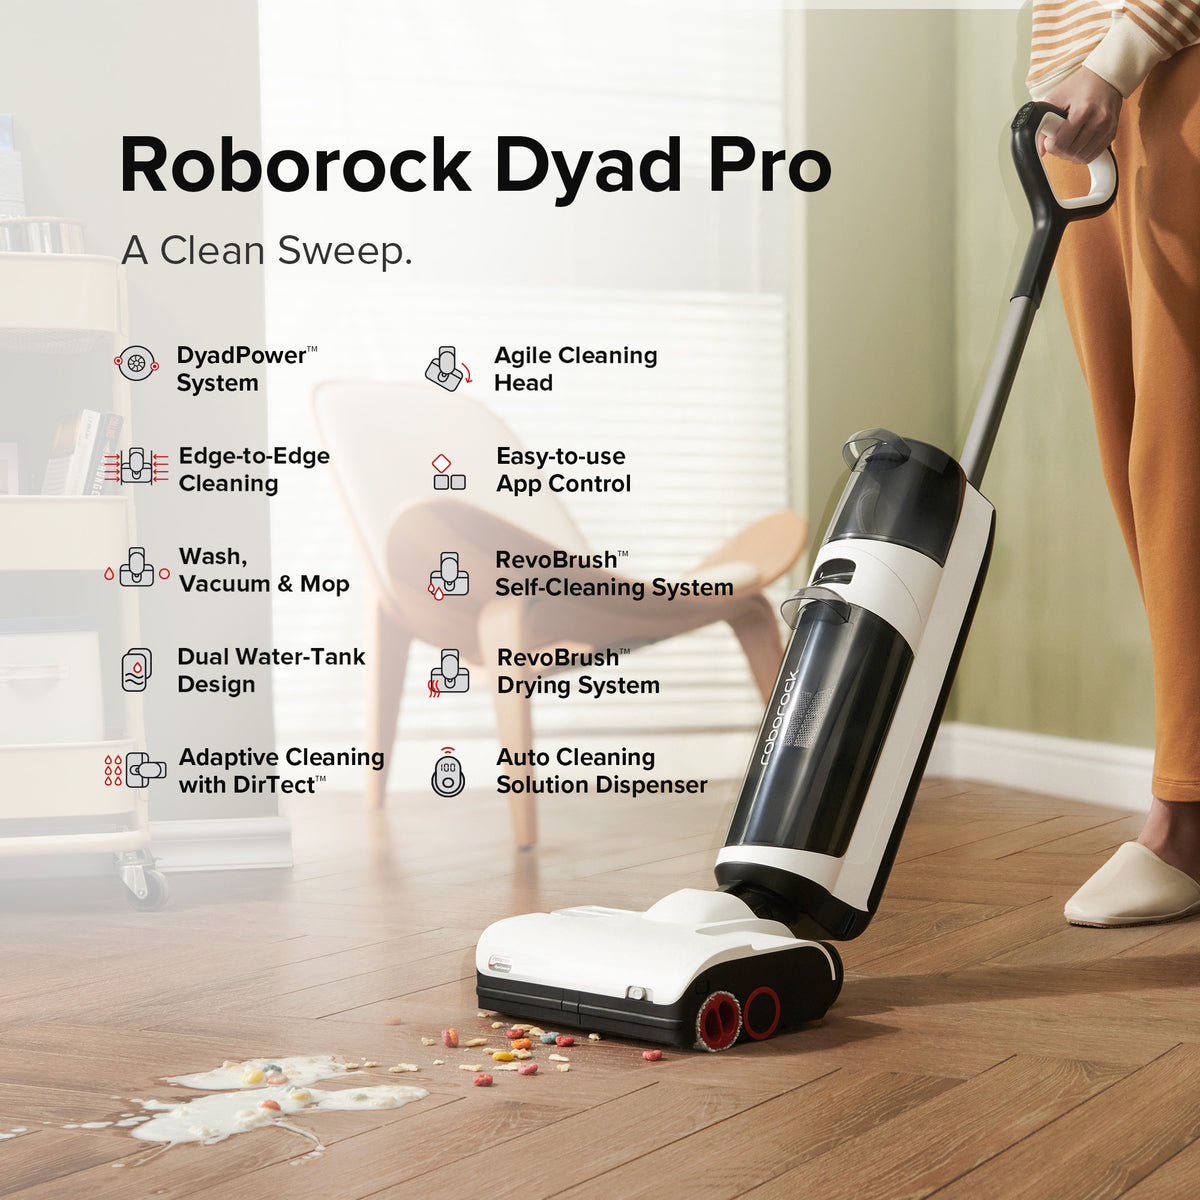 Handheld Vacuum Cleaner Floor Care Fluid Containers, Detergent Boxes, Boxes  for Adding Concentrates. Compatible for Roborock. Dyad Pro/Dyad Pro. Wet